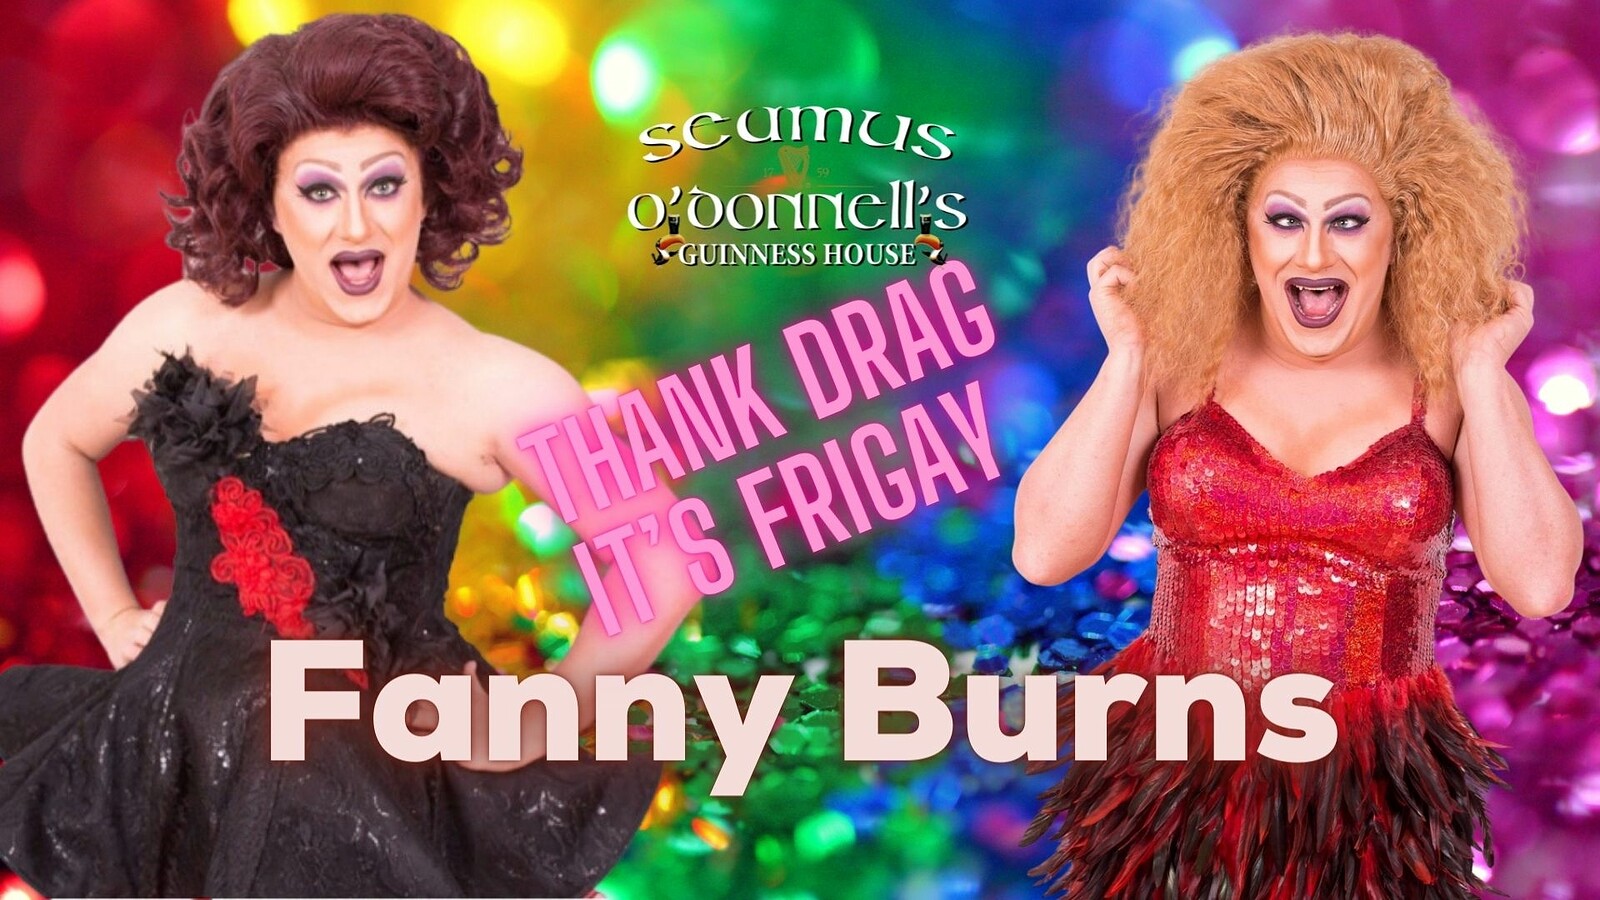 Thank Drag Its FriGay with Fanny Burns at Seamus O'Donnells